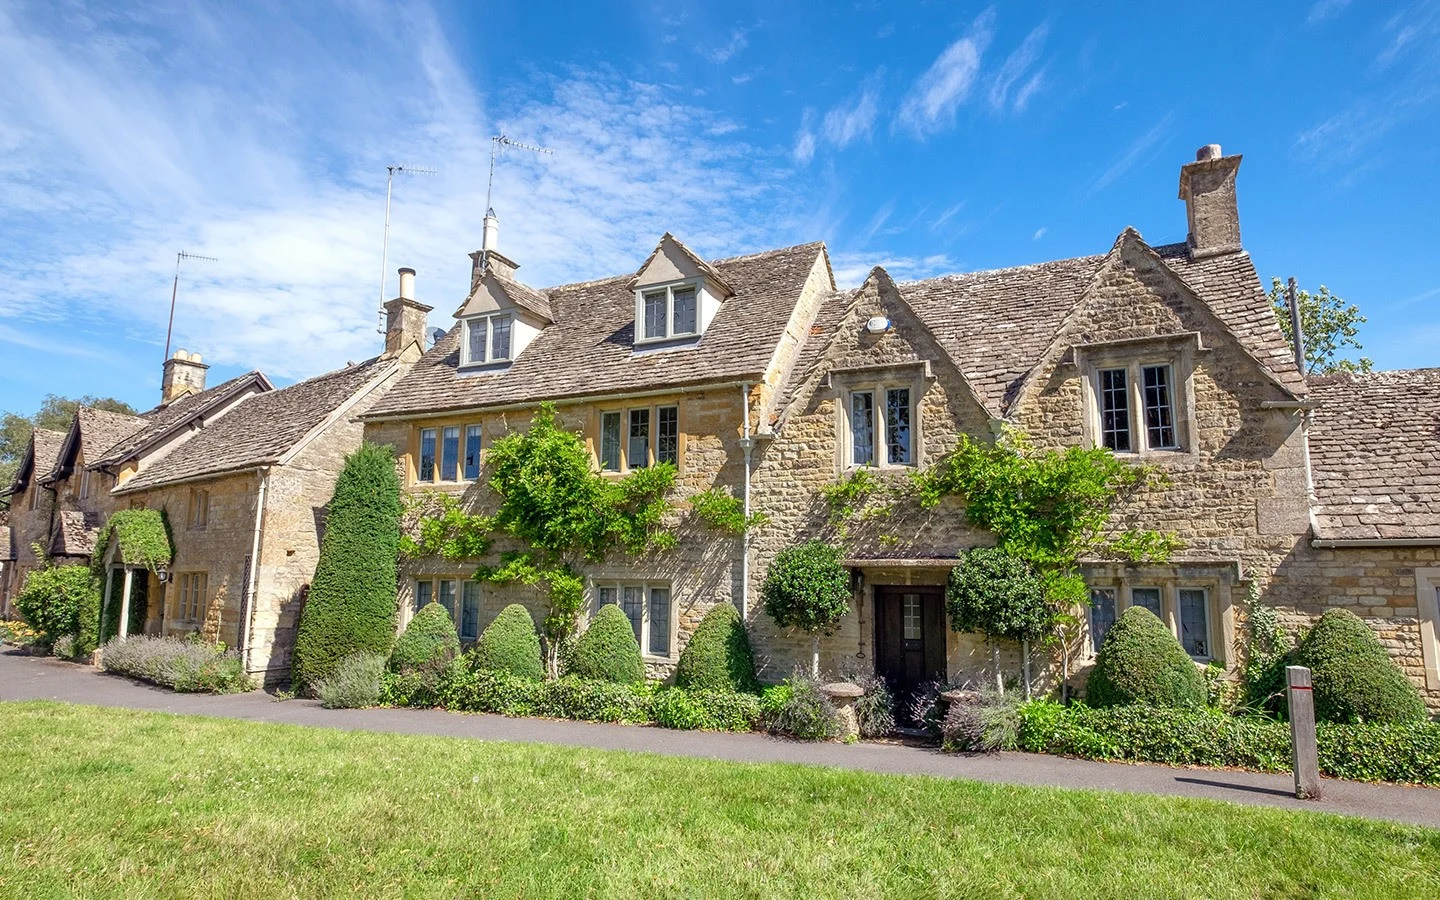 Cotswold stone cottages in Lower Slaughter